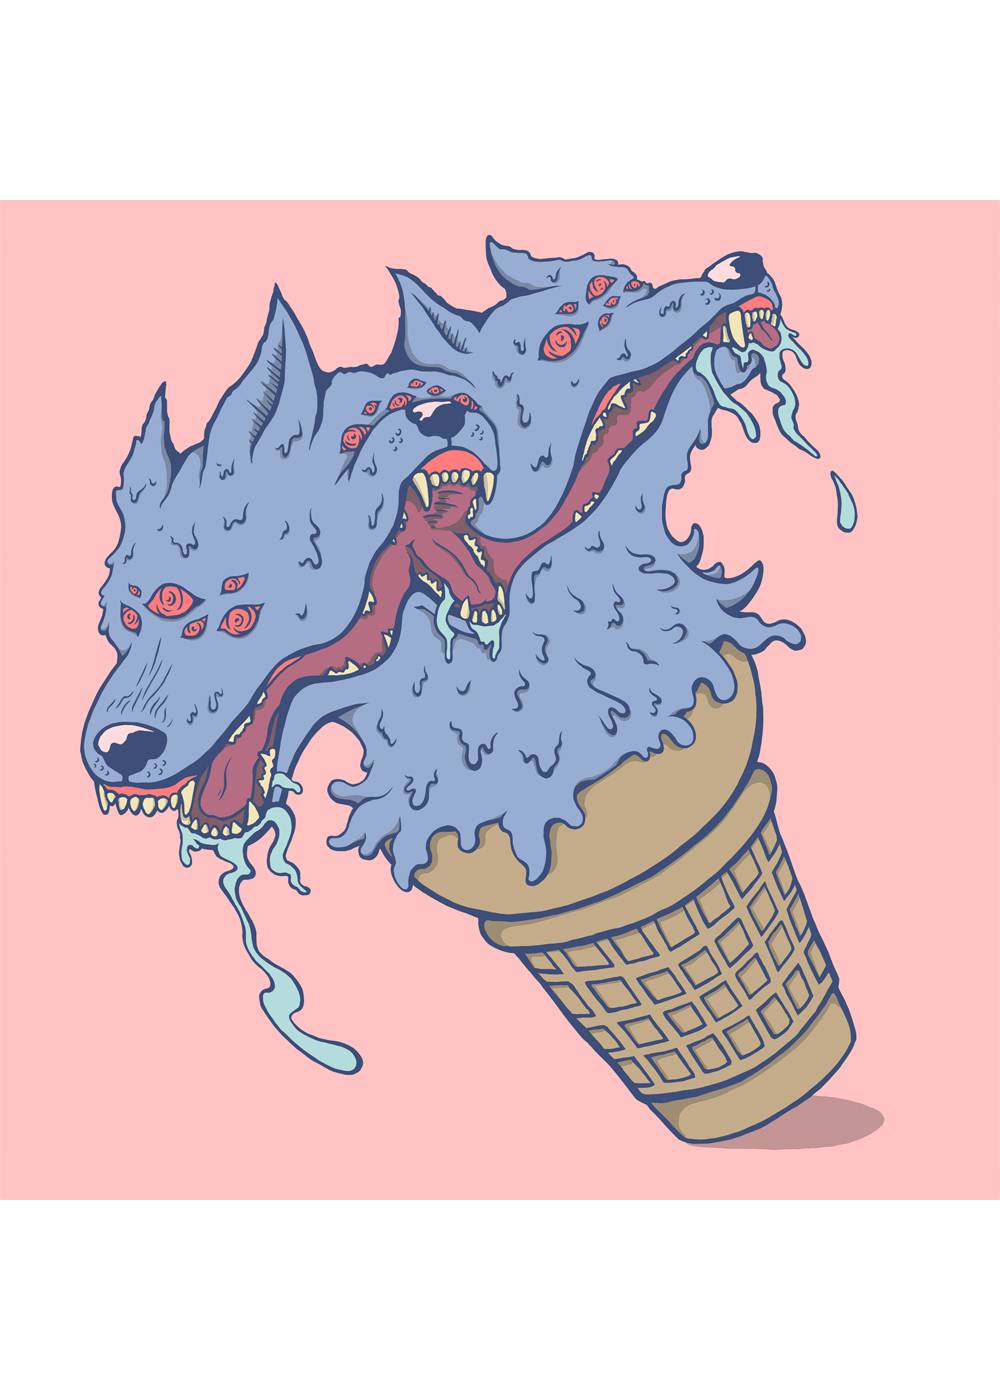 A ferocious ice cream beast that licks back. Don't worry, despite their appearance they don't bite. Wolf, Dog, Yum, Dessert, Funky, Surreal, Fun, Psychedelic.